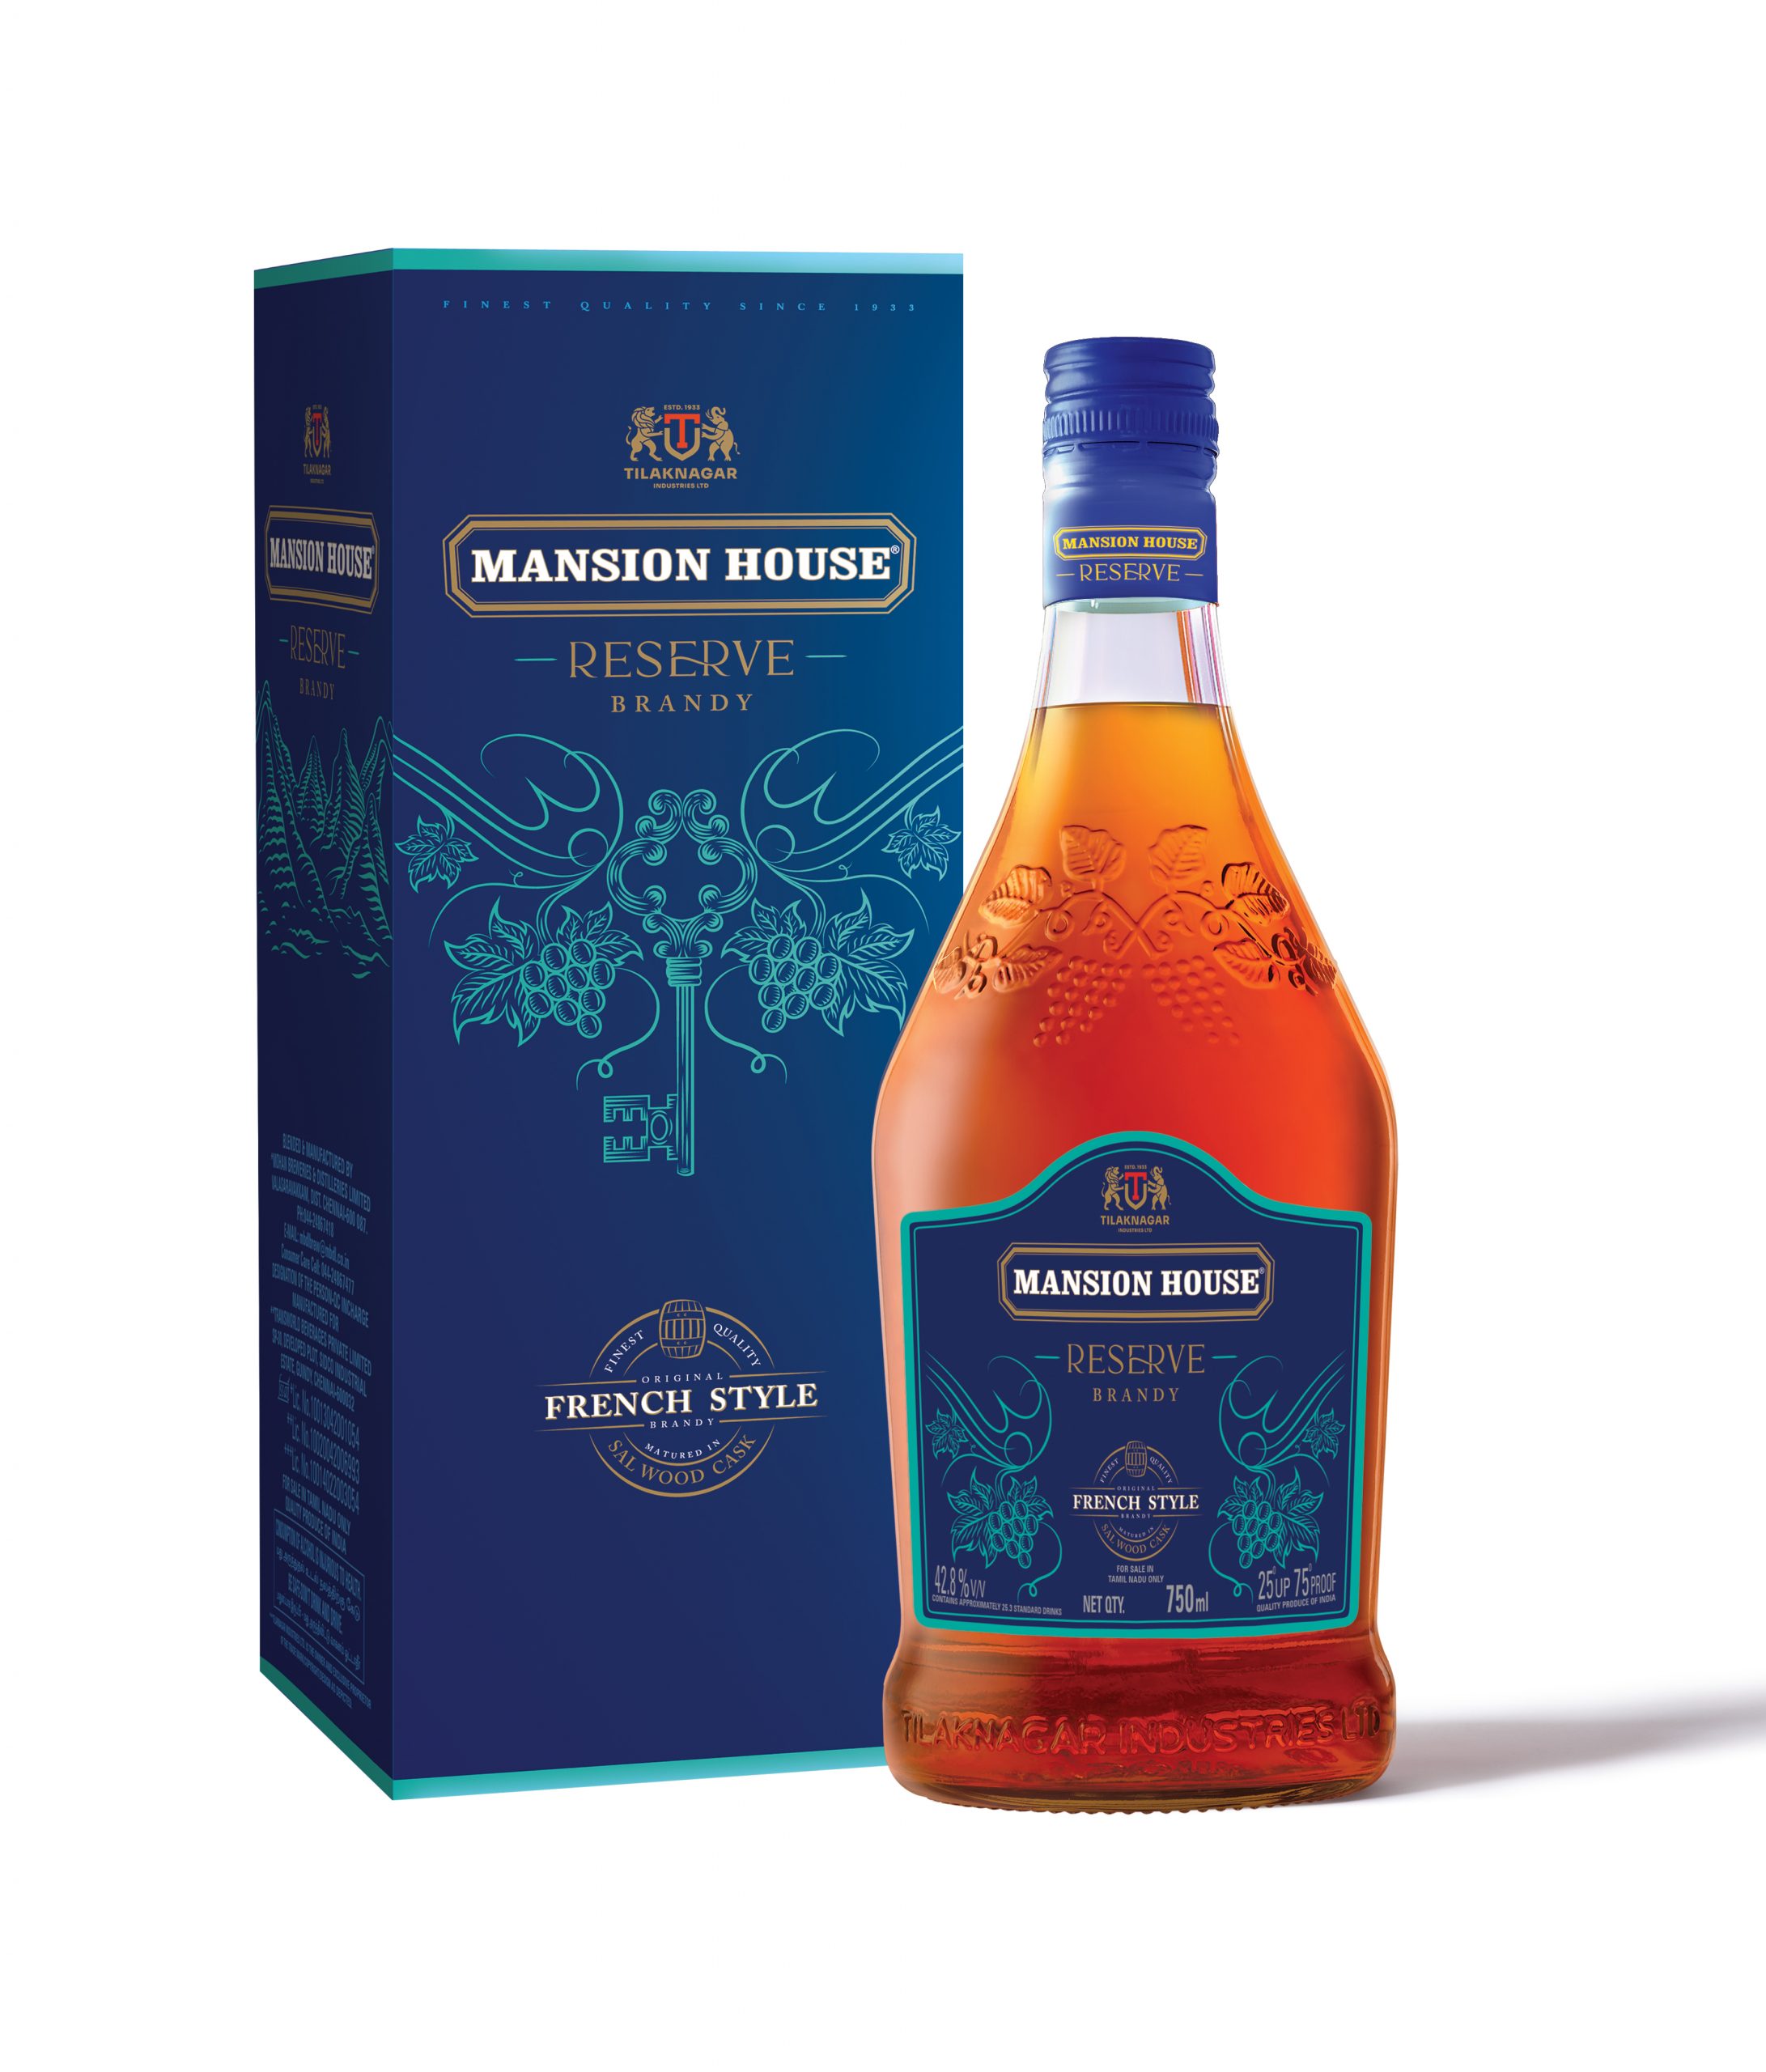 Tilaknagar Industries Launches Mansion House Reserve French Style Brandy 25